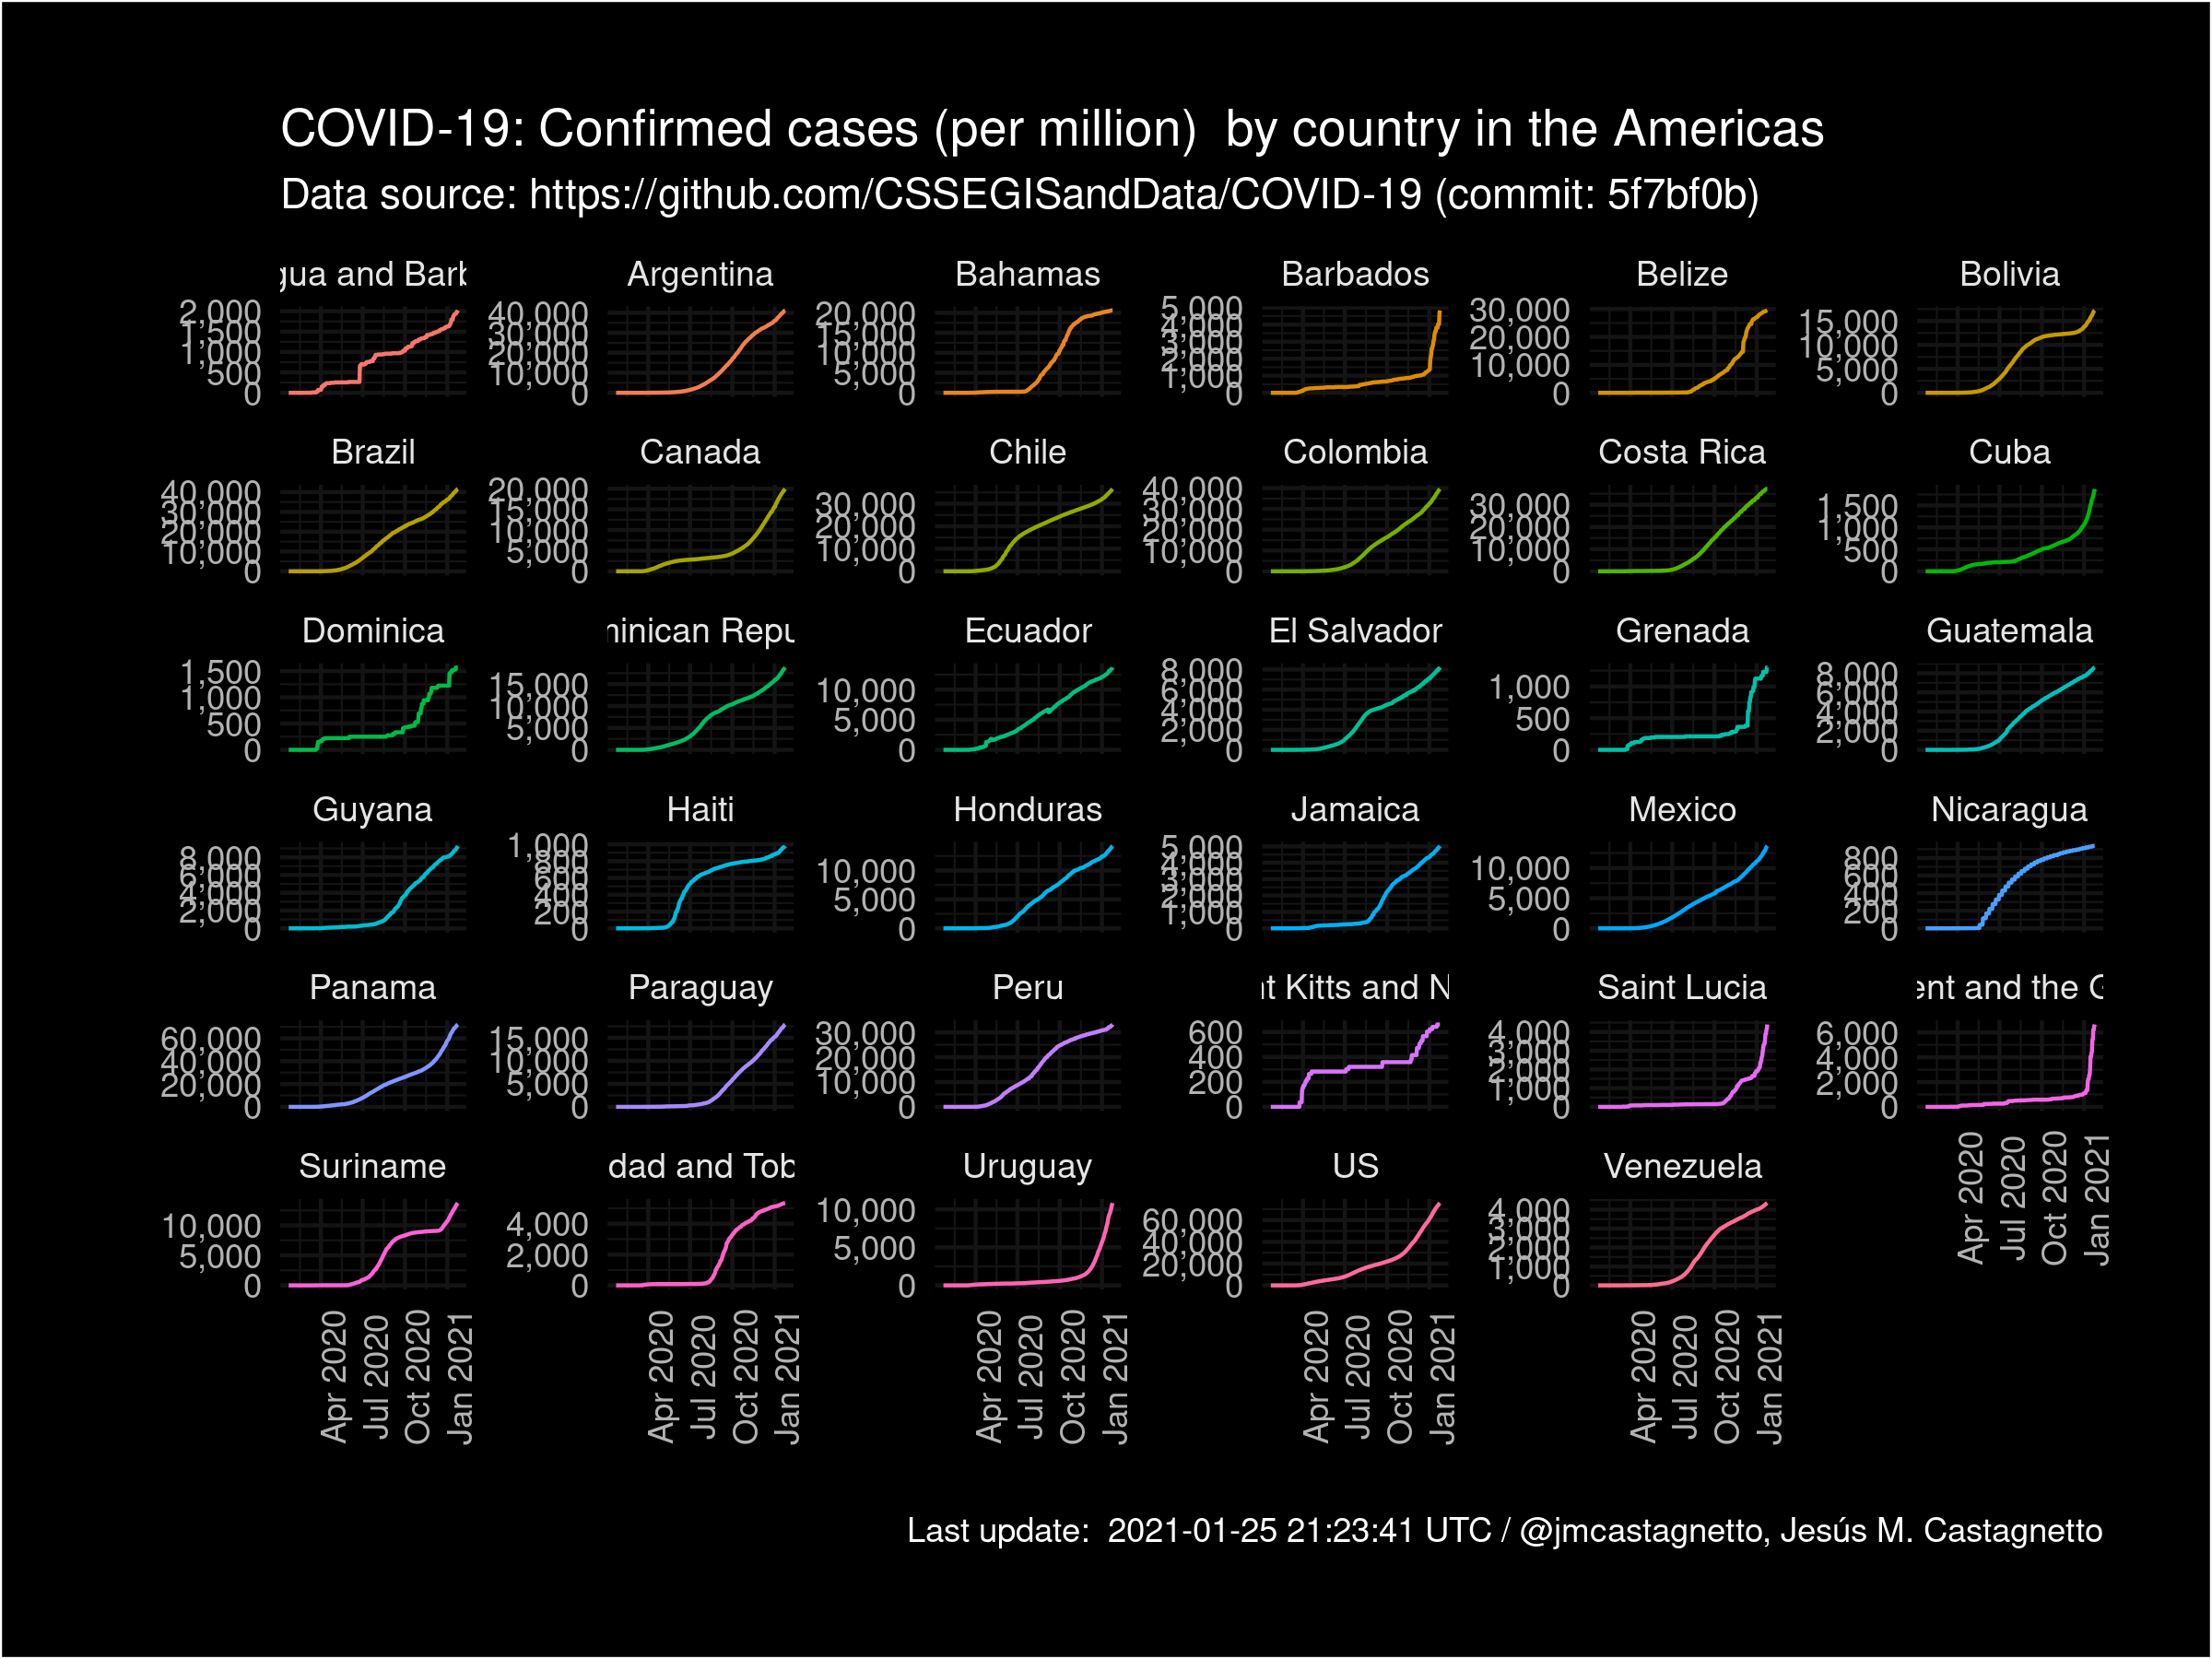 COVID-19 Confirmed cases by country per million (Americas)